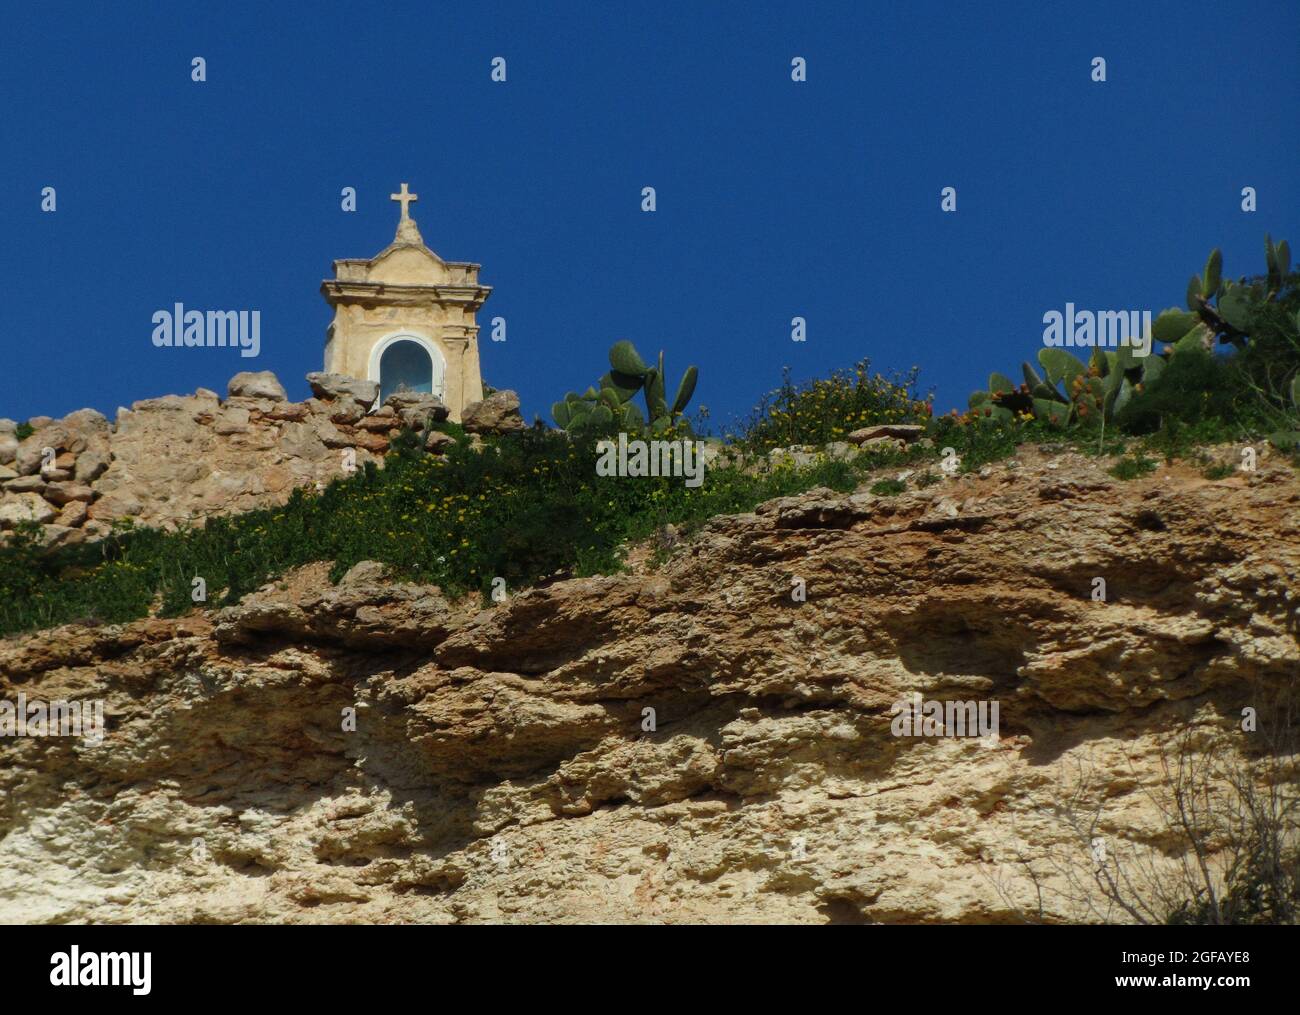 MGARR, MALTA - Feb 09, 2014: A limestone niche, with a statue of the Virgin Mary, on top of a cliff in the countryside of Malta Stock Photo